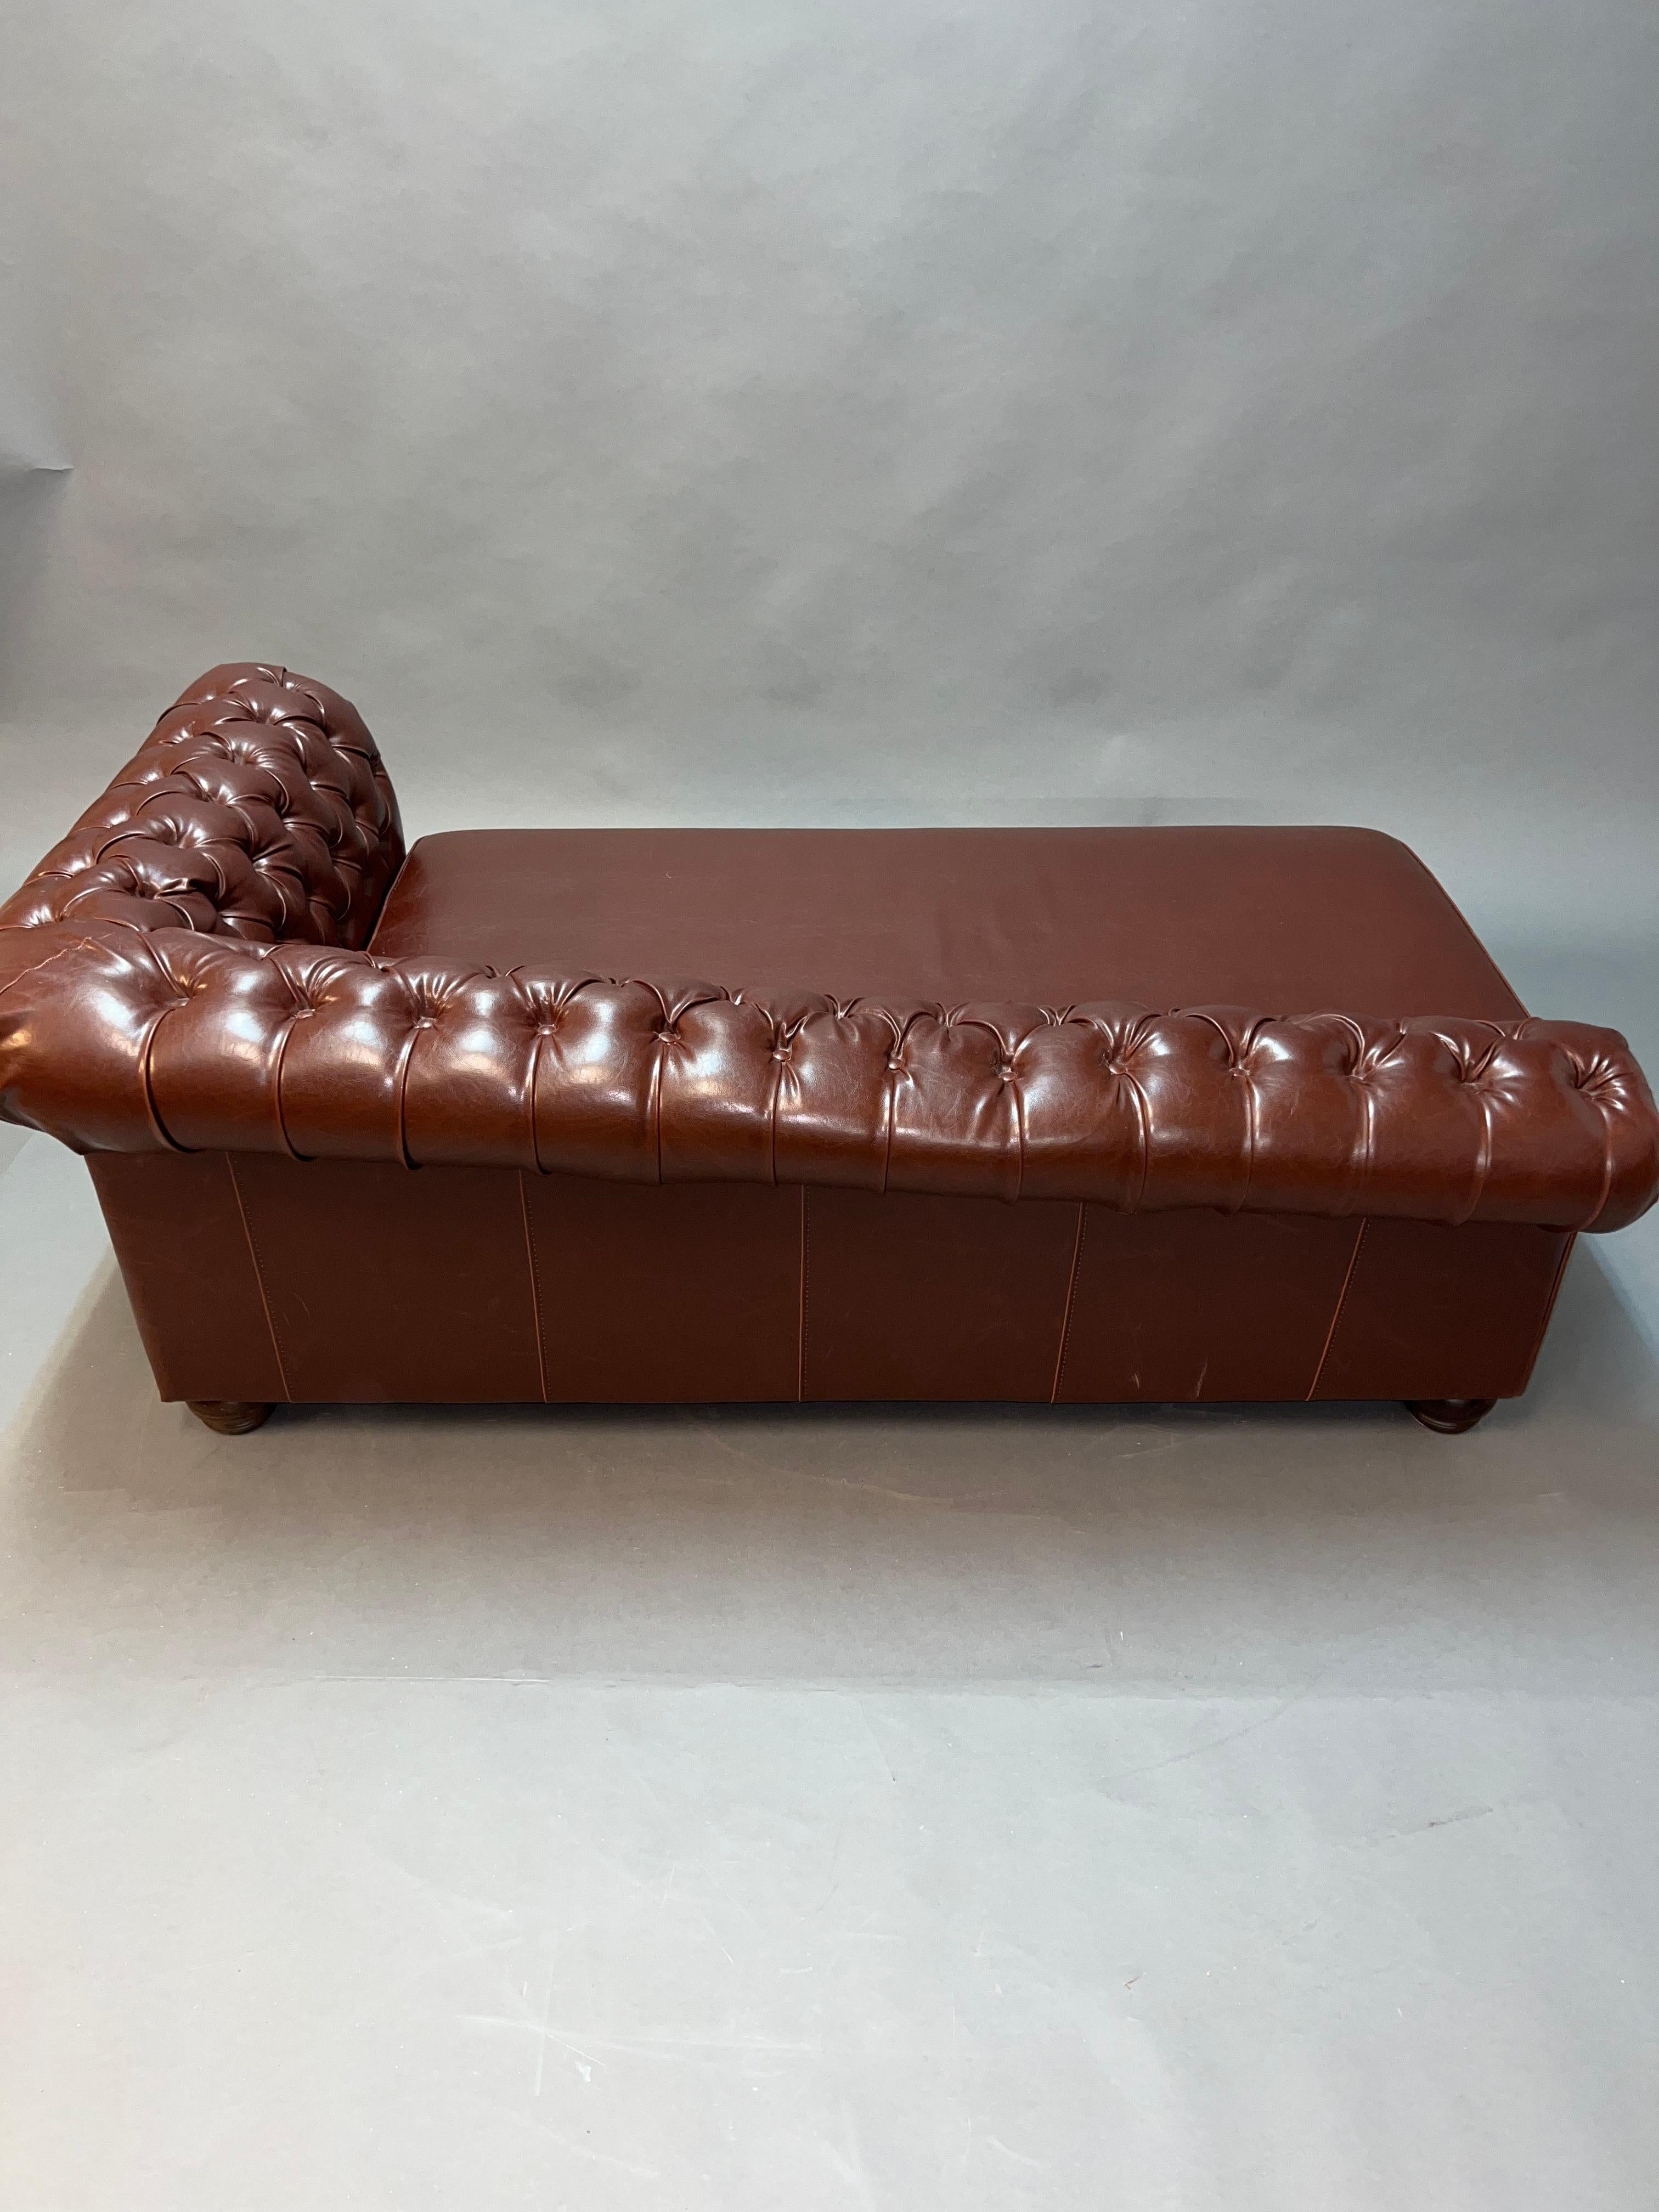 Lovely Vintage Chesterfield Brown Leather Look Chaise Lounge Daybed Sofa For Sale 1